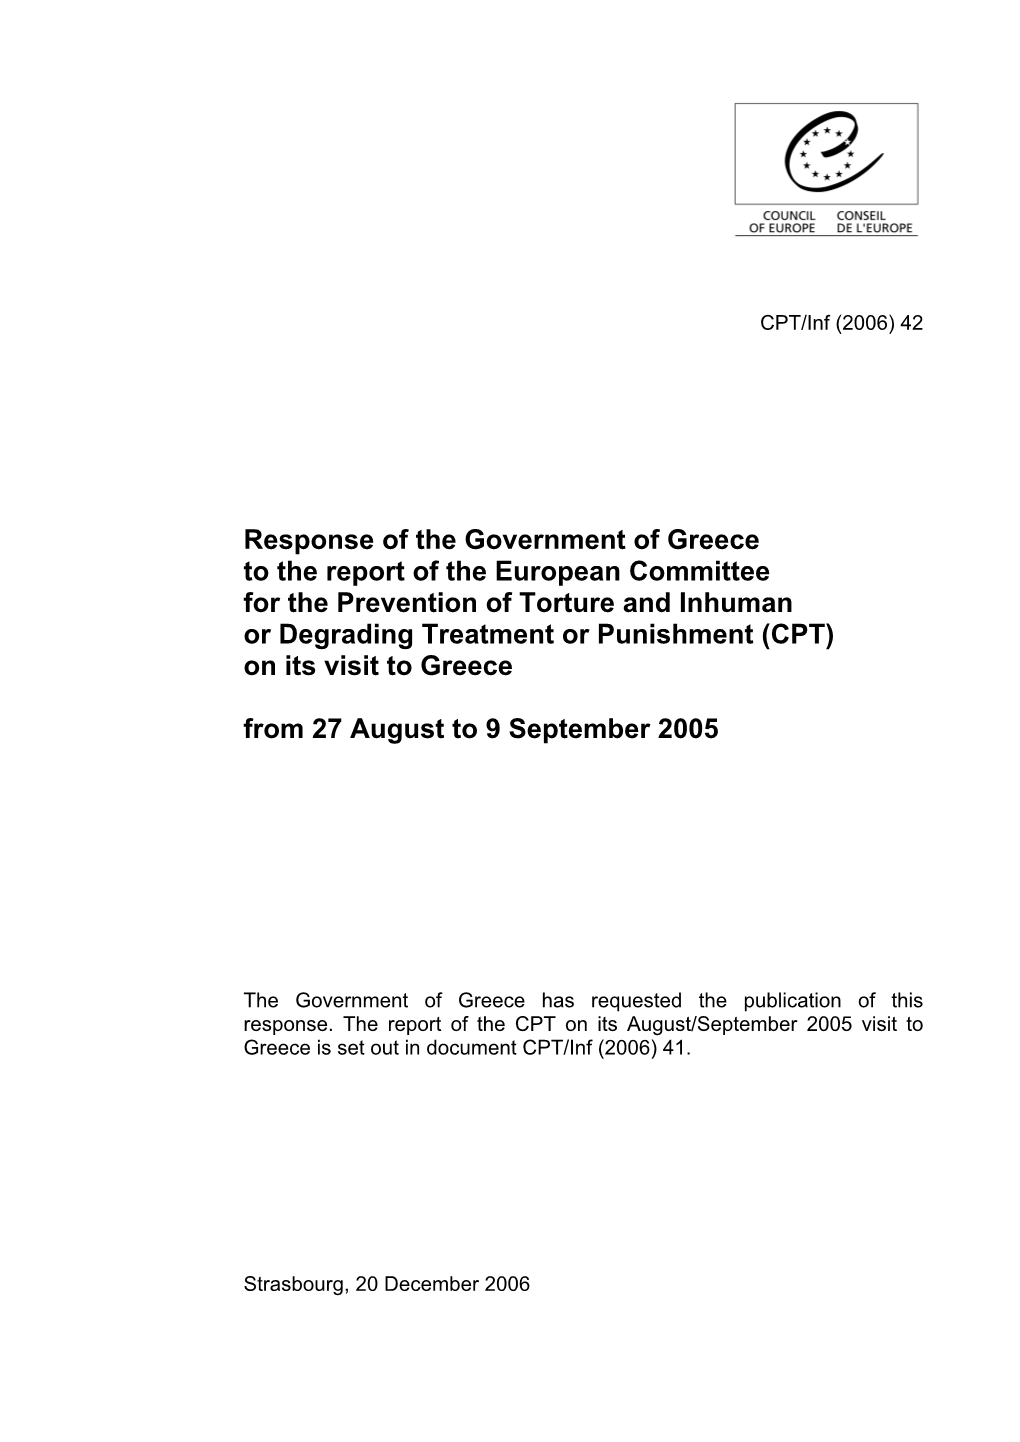 Response of the Government of Greece to the Report of The